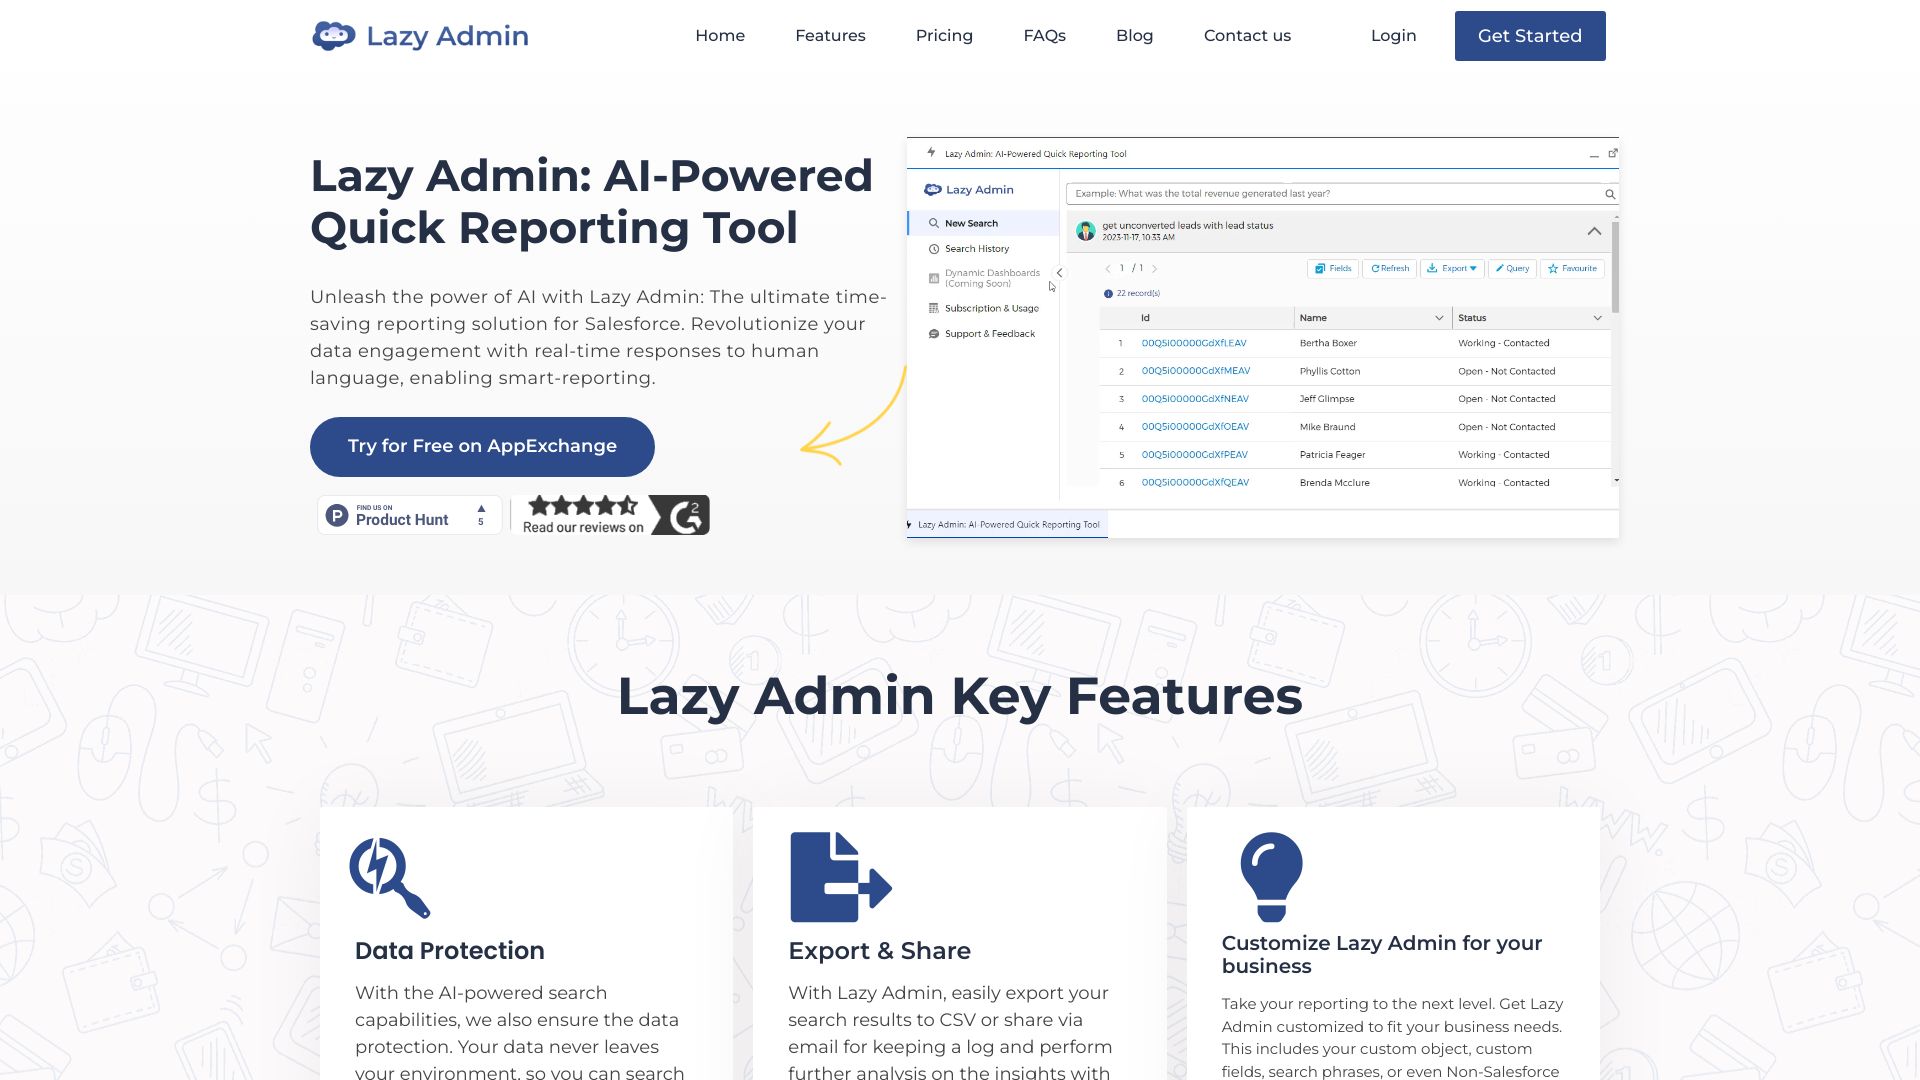 Lazy Admin AI-Powered Reporting Tool